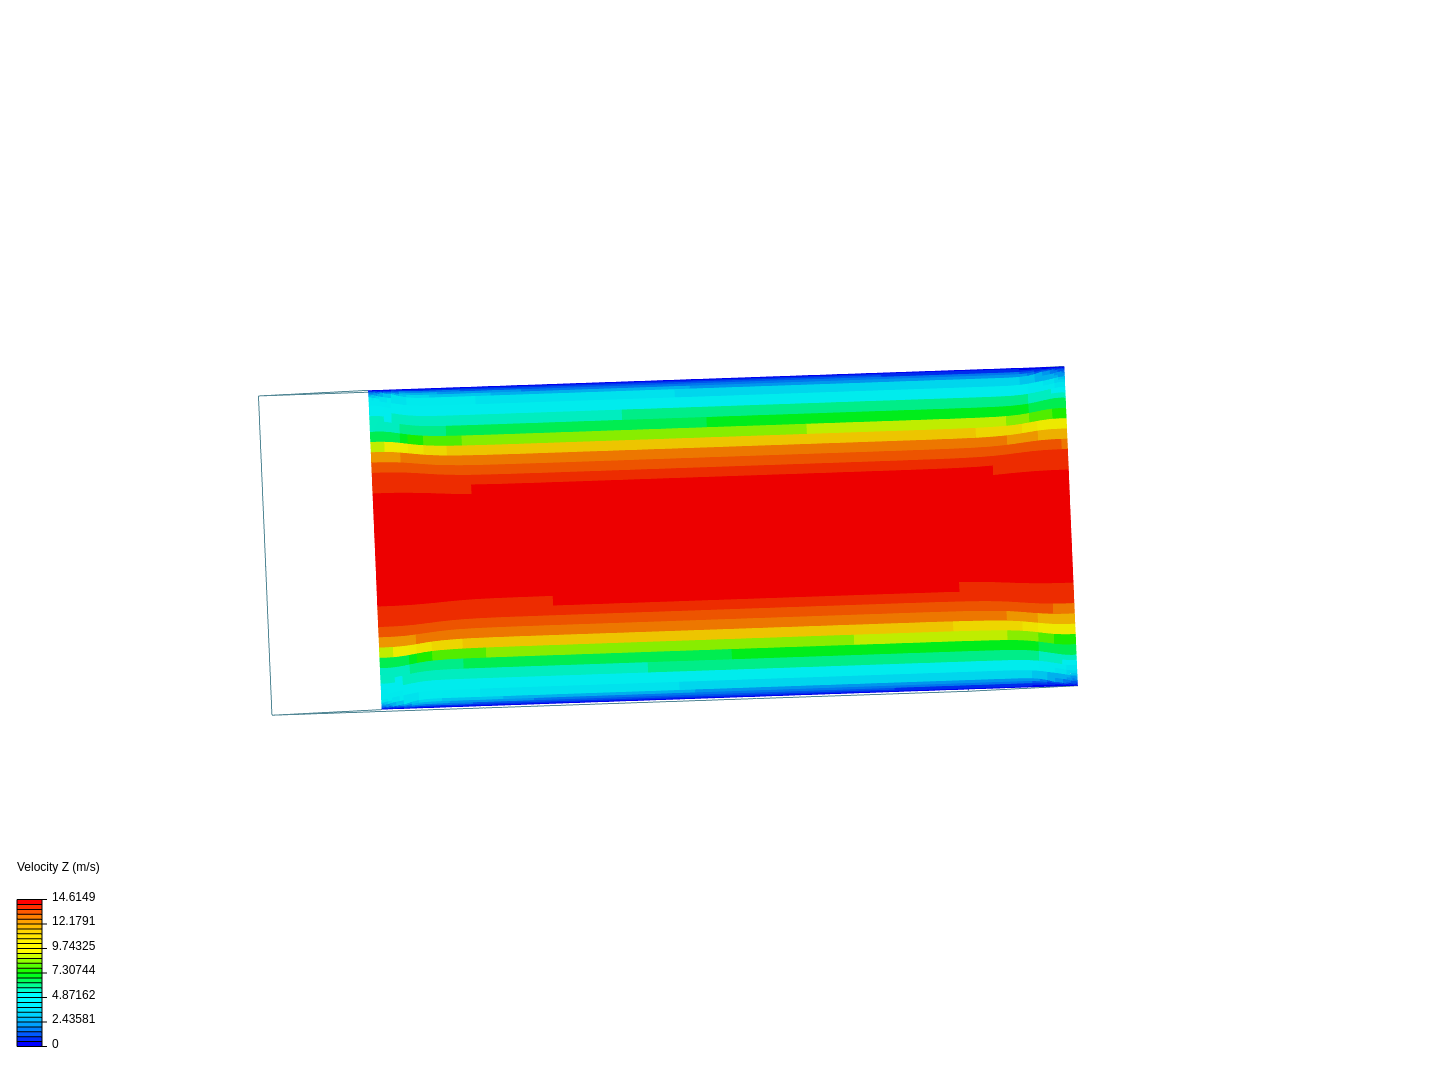 Boundary Layer Try 2 image